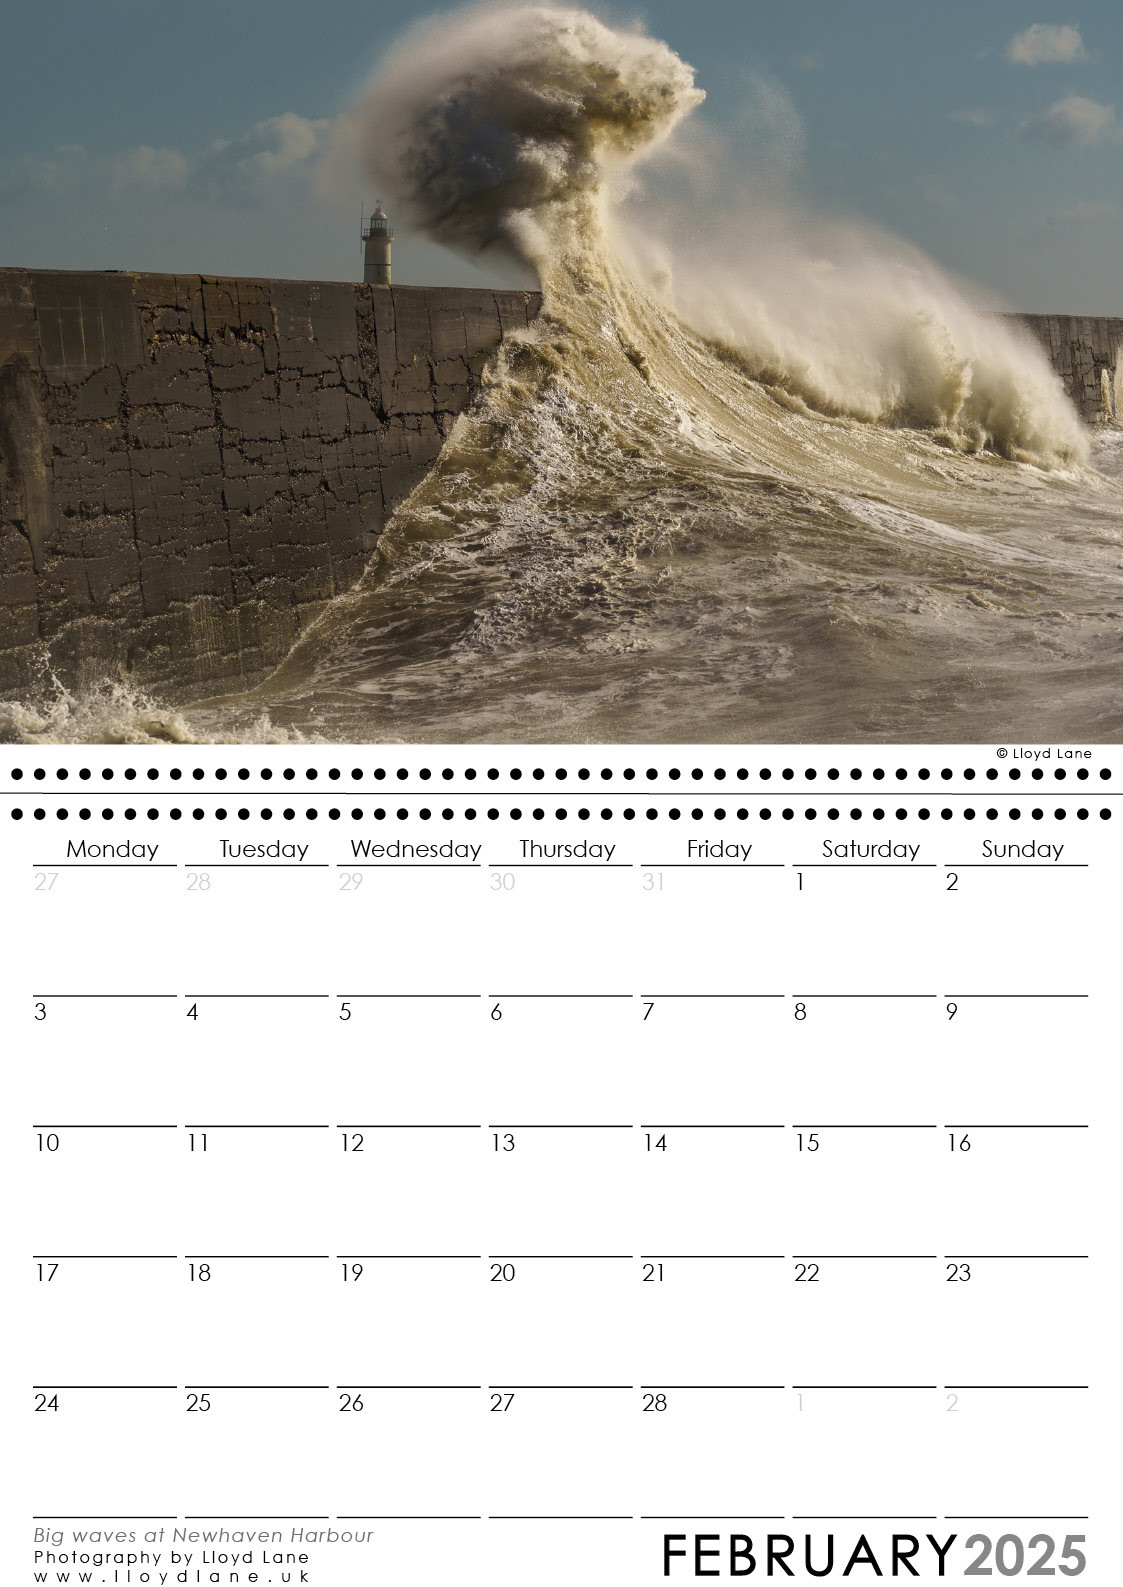 Sussex Calendar 2025 - Big waves at Newhaven